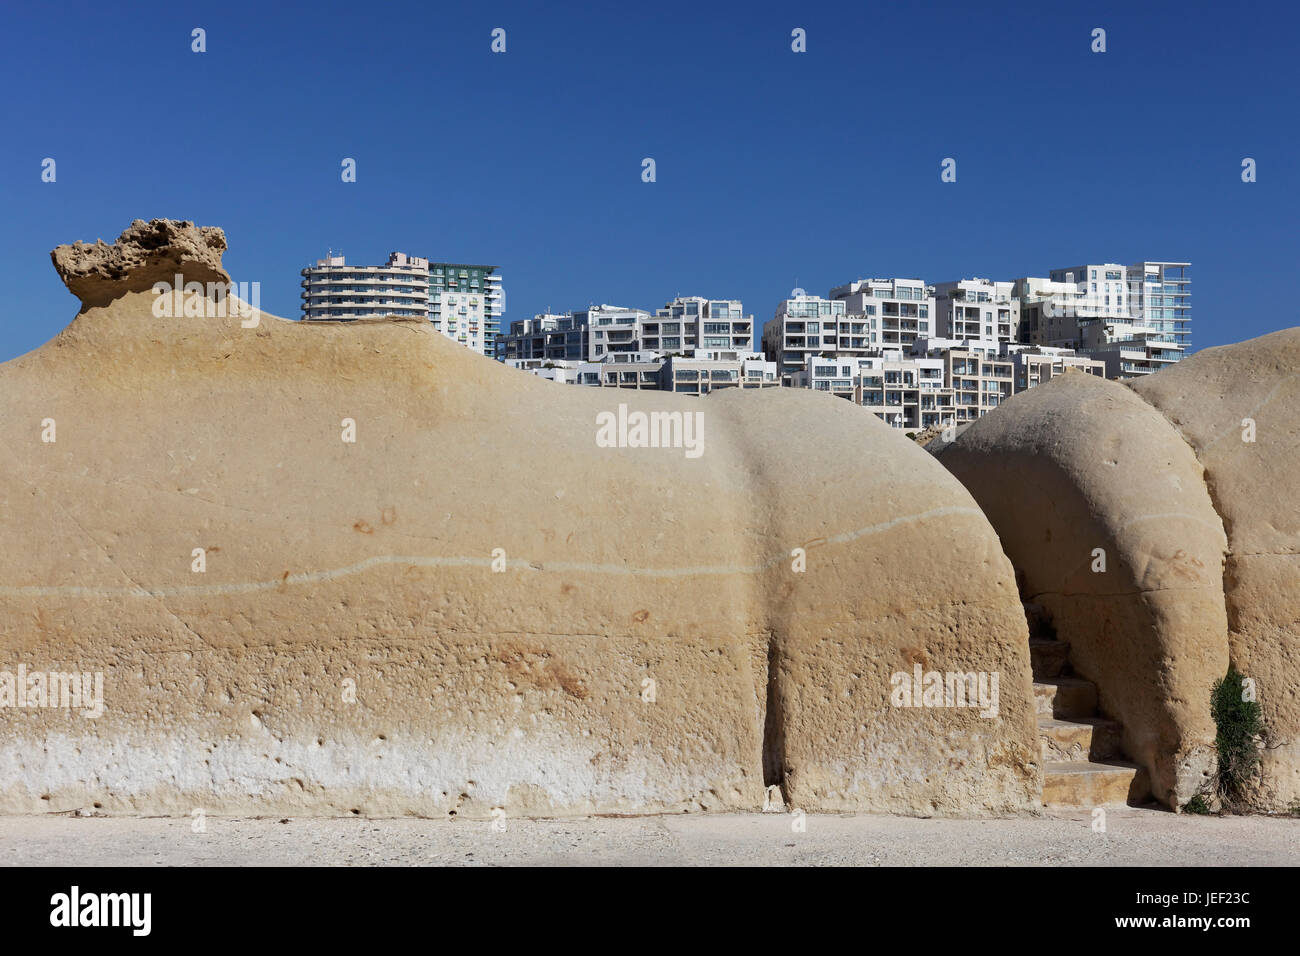 Ocher colored limestone sand formation at St. Elmo Bay from Valletta, view of residential blocks on the Tigné spit of land Stock Photo